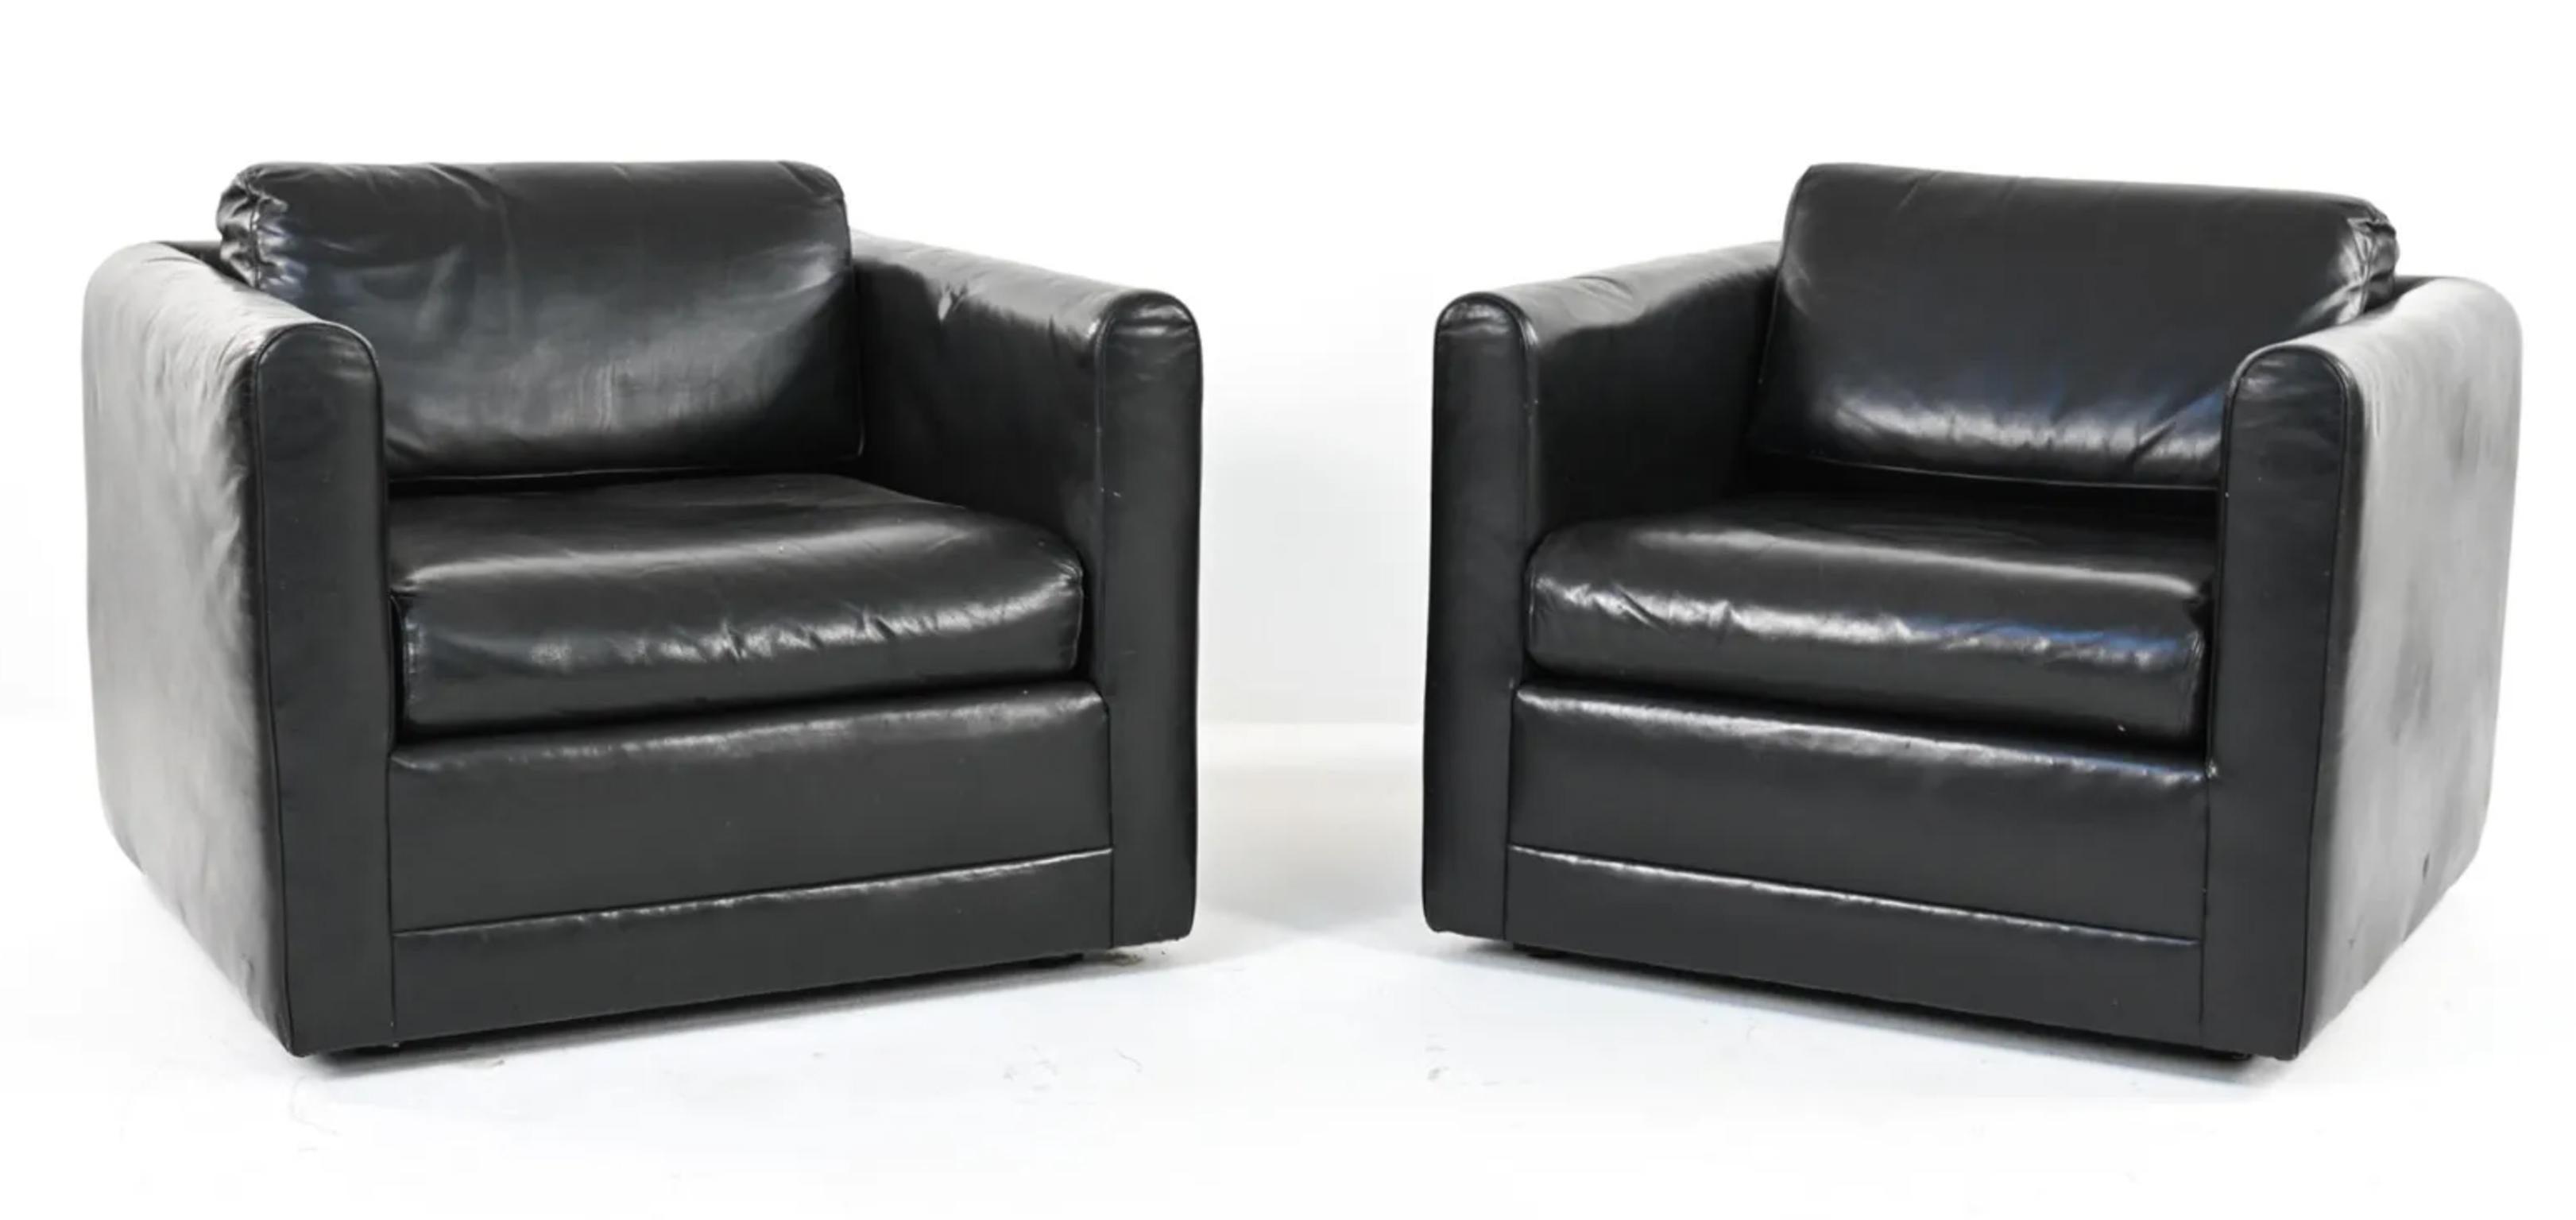 American Mid-Century Modern Style Cube Lounge Club Chairs by in Black Leather